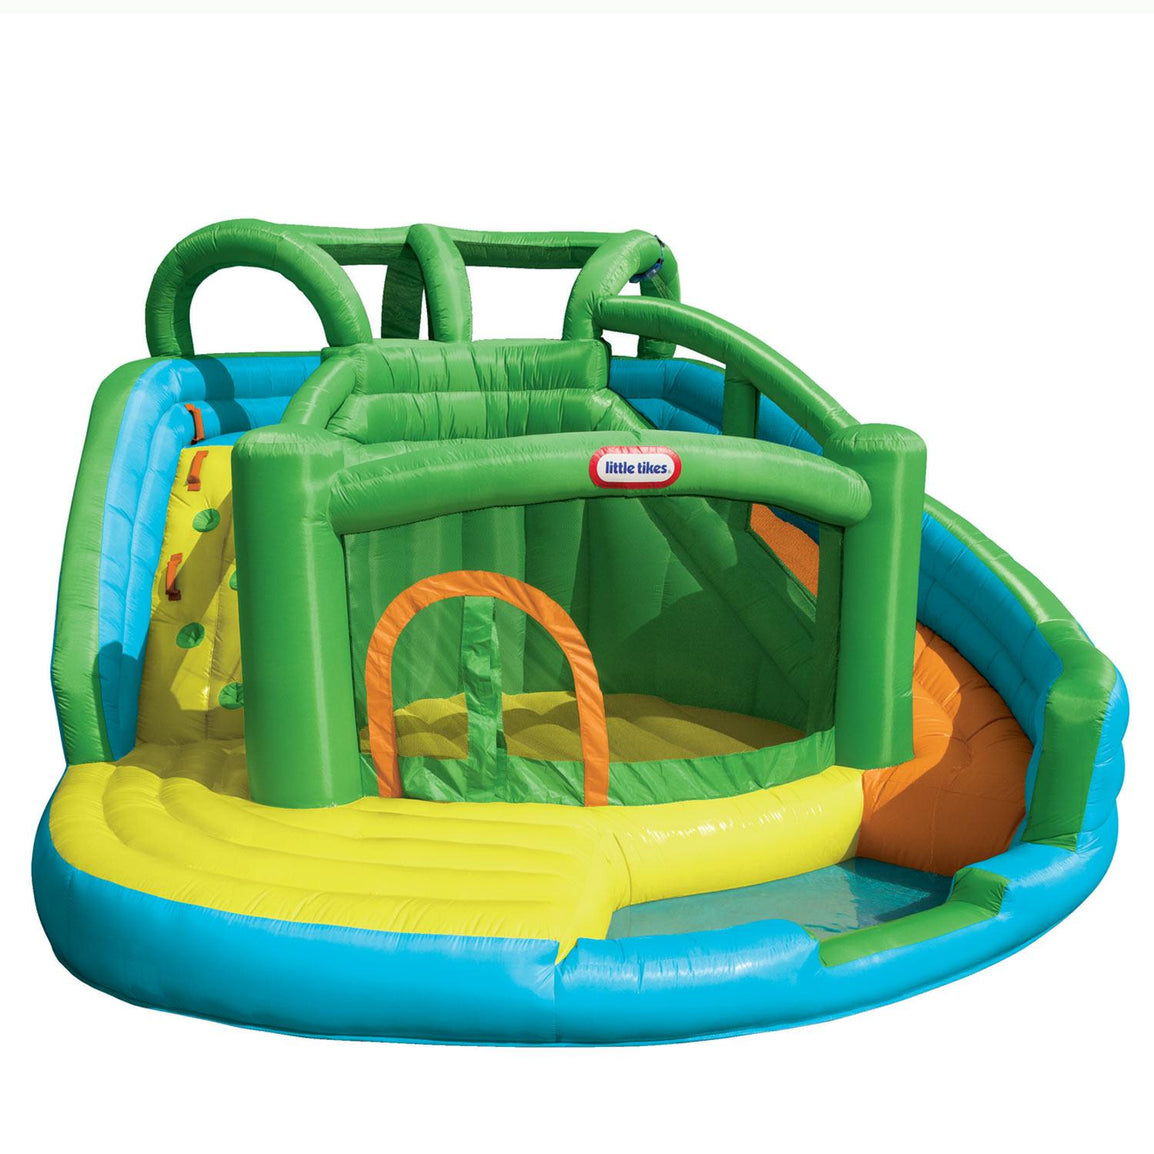 Add water it becomes a wet bounce water slide; keep it dry and it's a big bouncing play place!